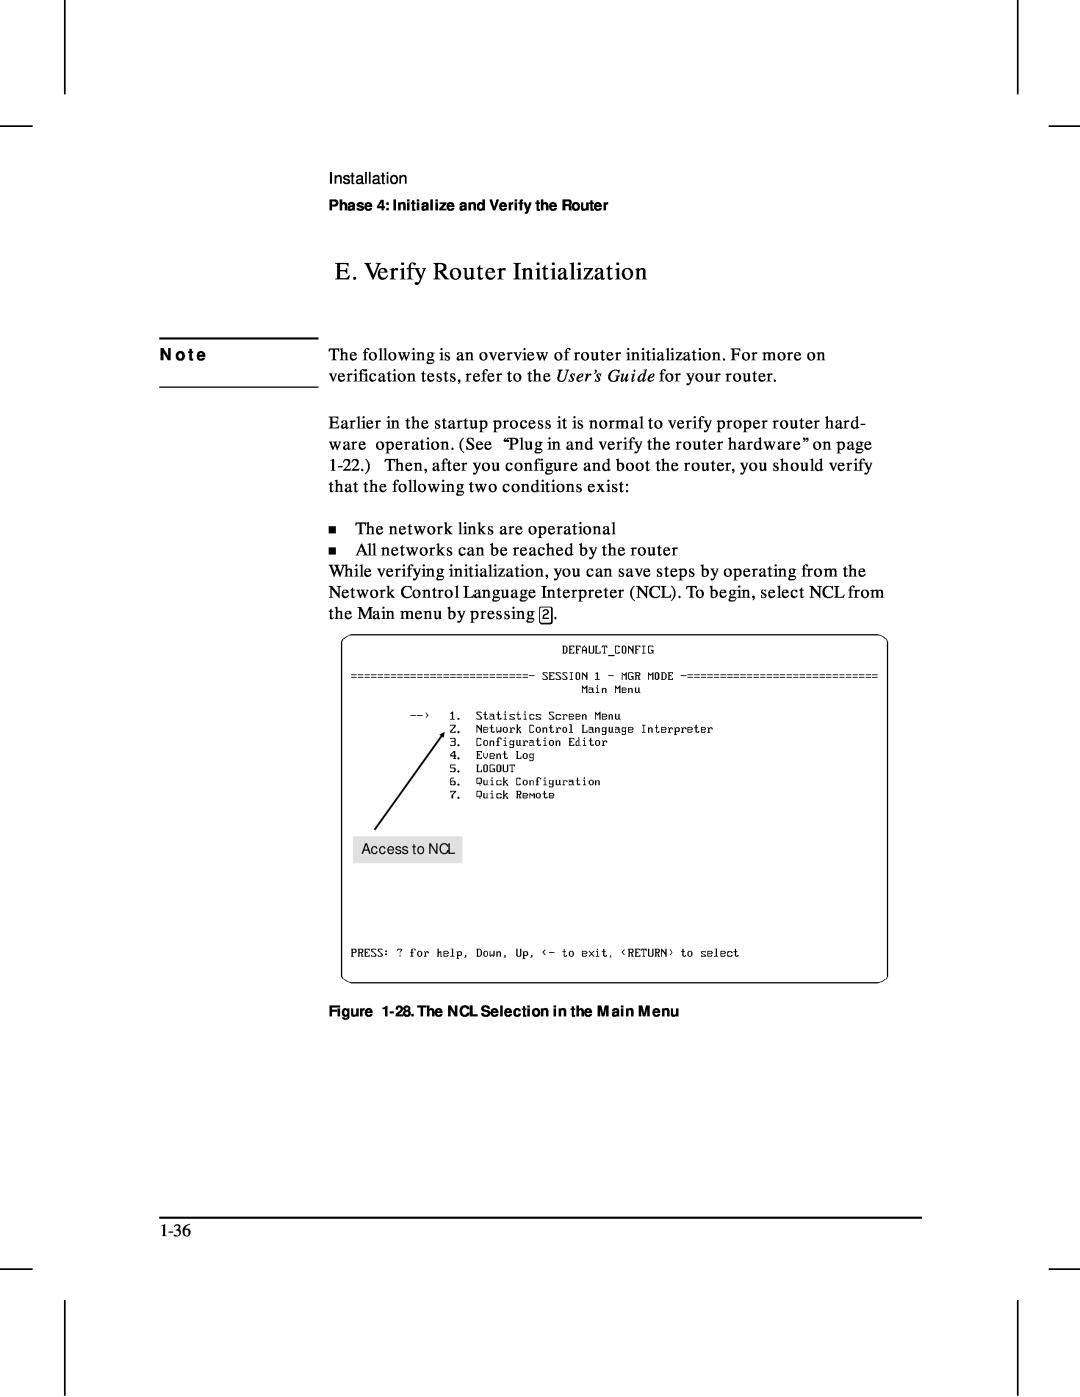 HP 480 manual E. Verify Router Initialization, N o t e, Phase 4 Initialize and Verify the Router 